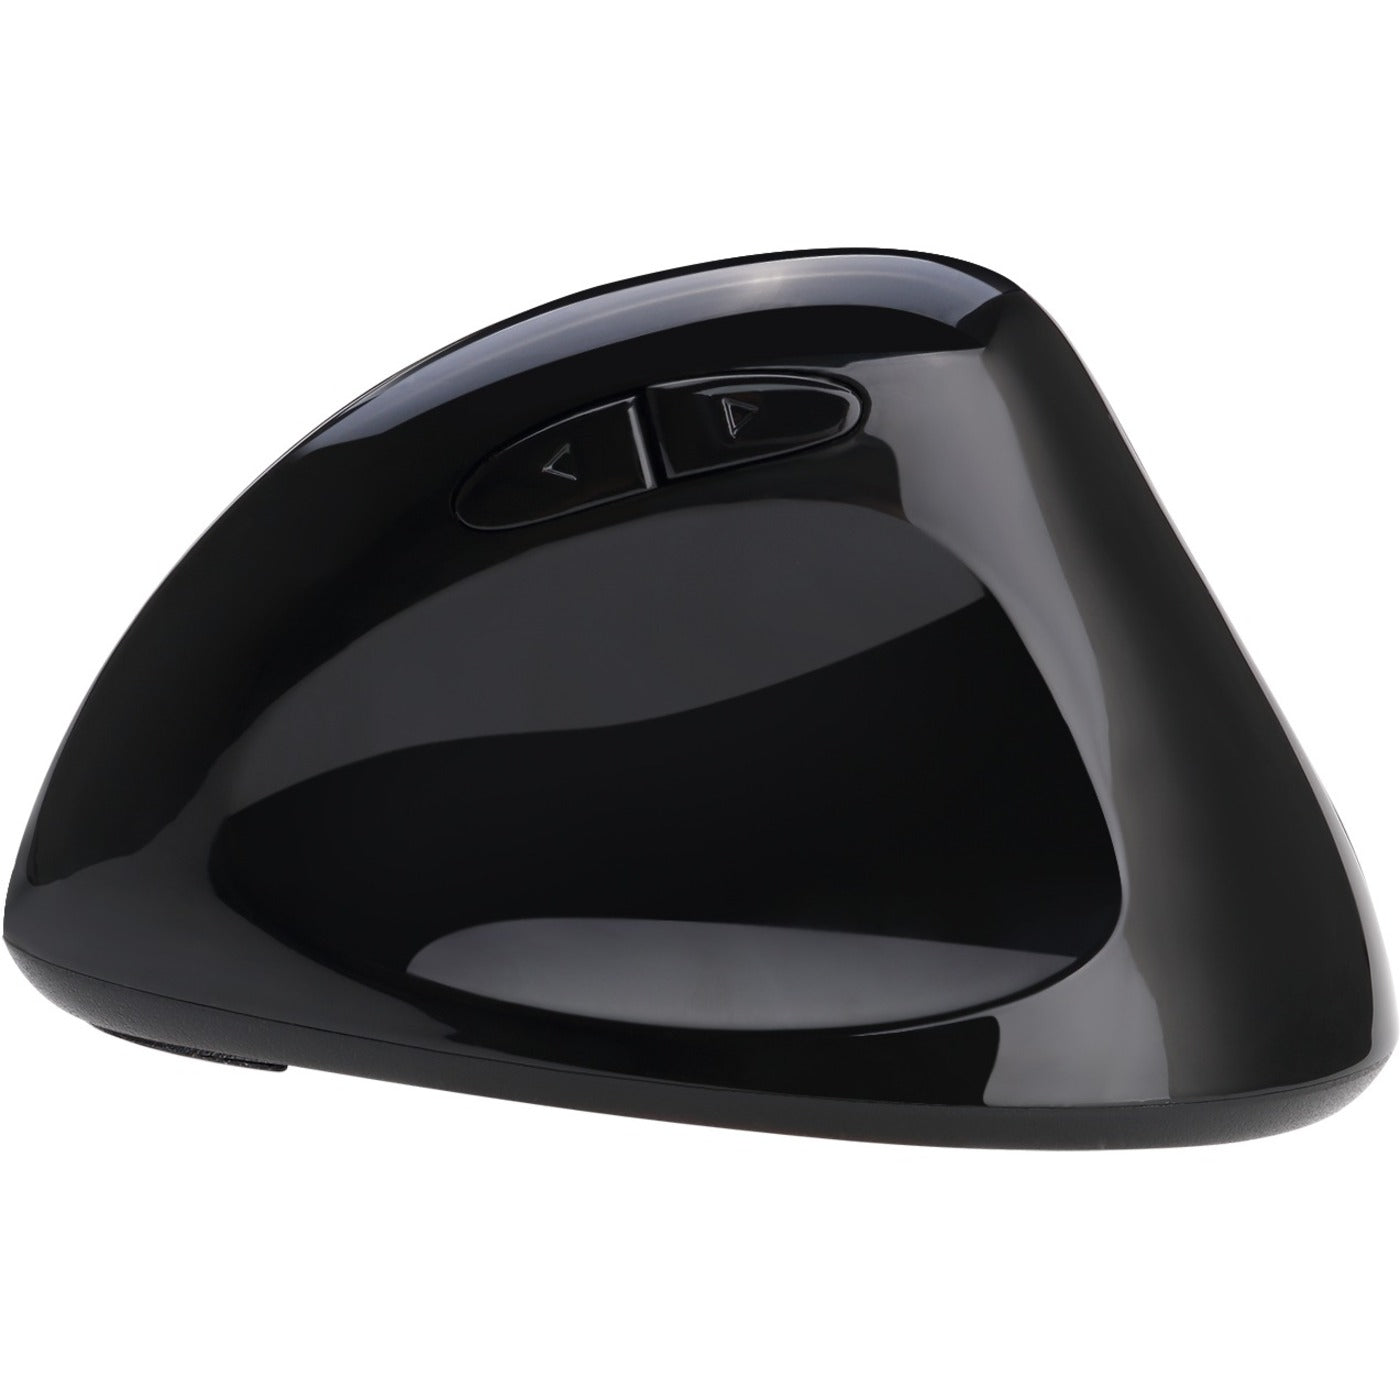 Adesso IMOUSE E30 iMouse E30 - 2.4 GHz Wireless Vertical Programmable Mouse, Ergonomic Fit, 2400 dpi, USB